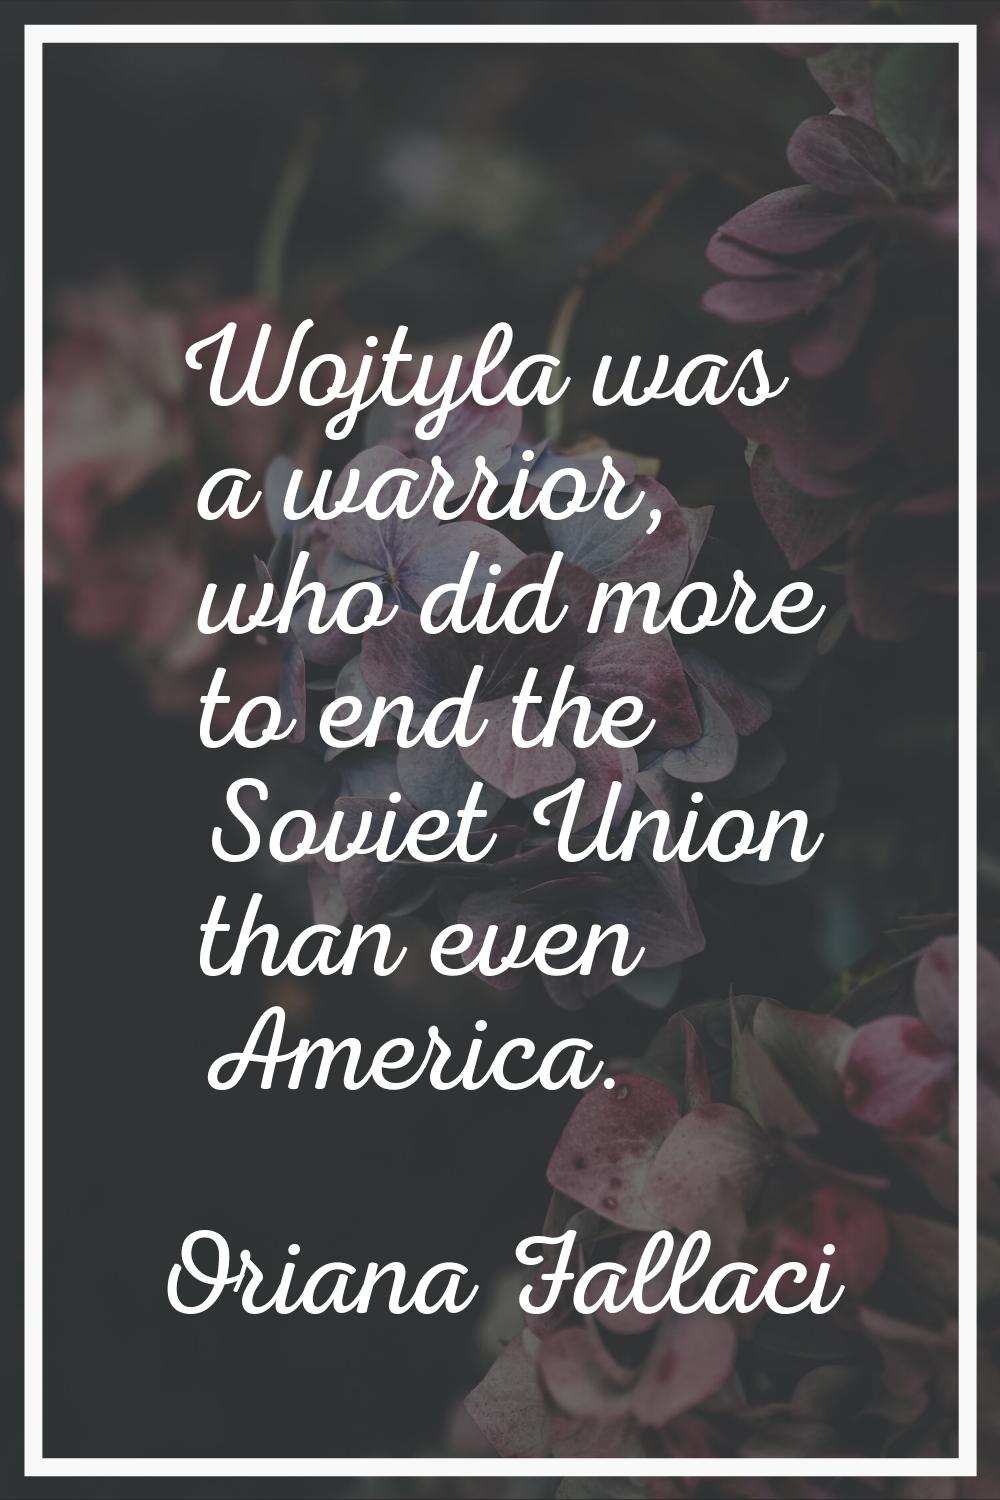 Wojtyla was a warrior, who did more to end the Soviet Union than even America.